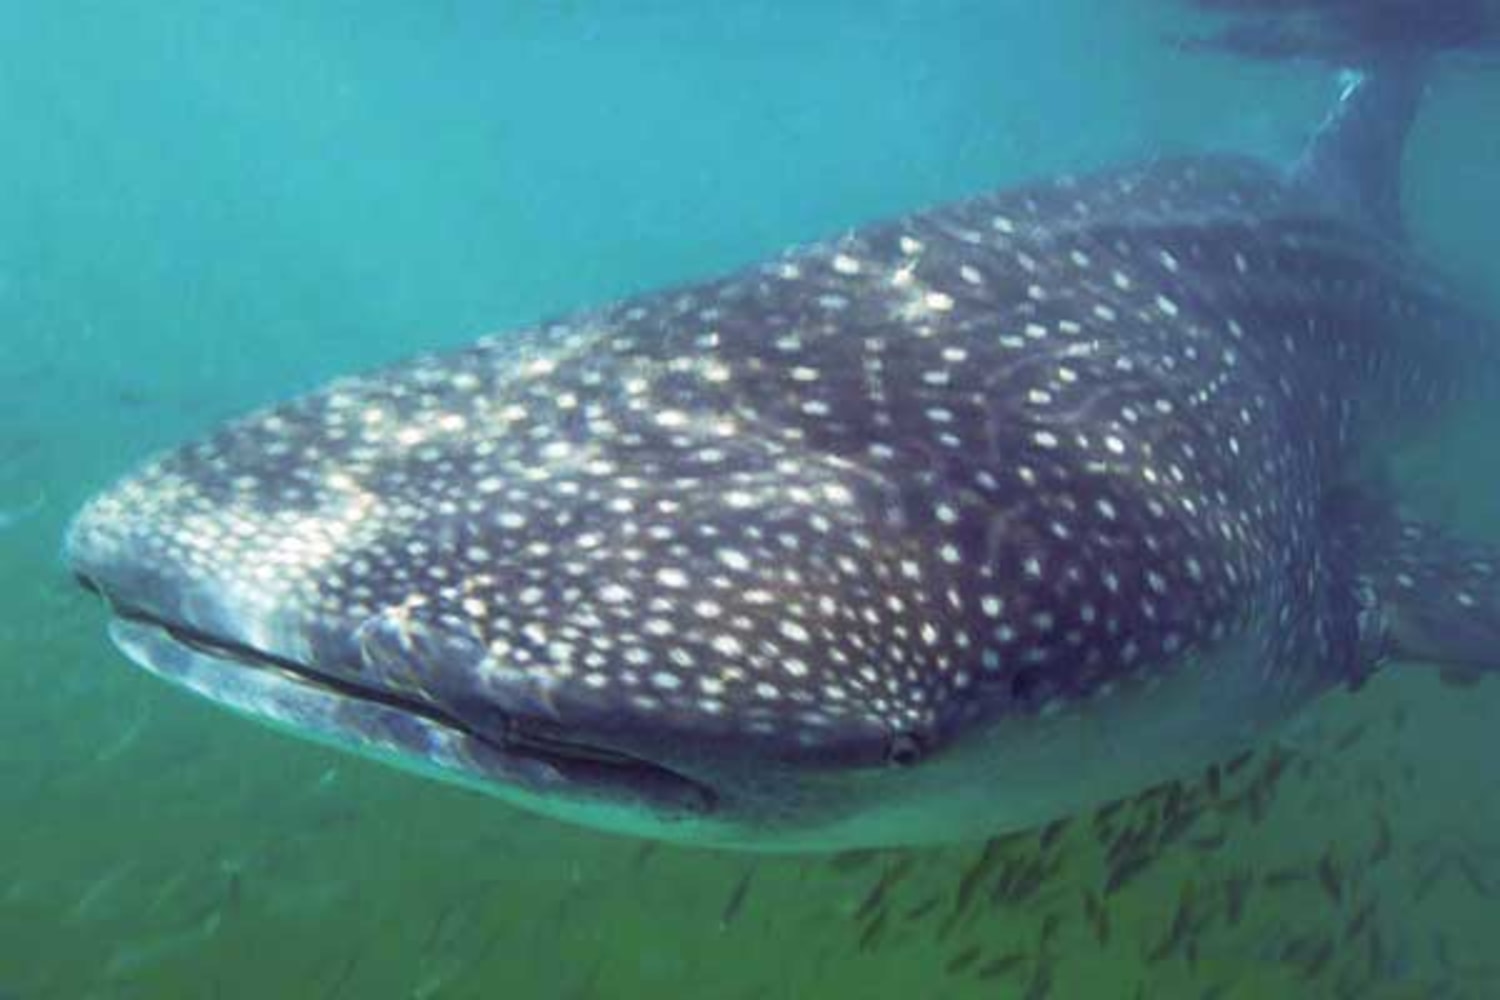 Whale sharks gather at a few specific locations around the world